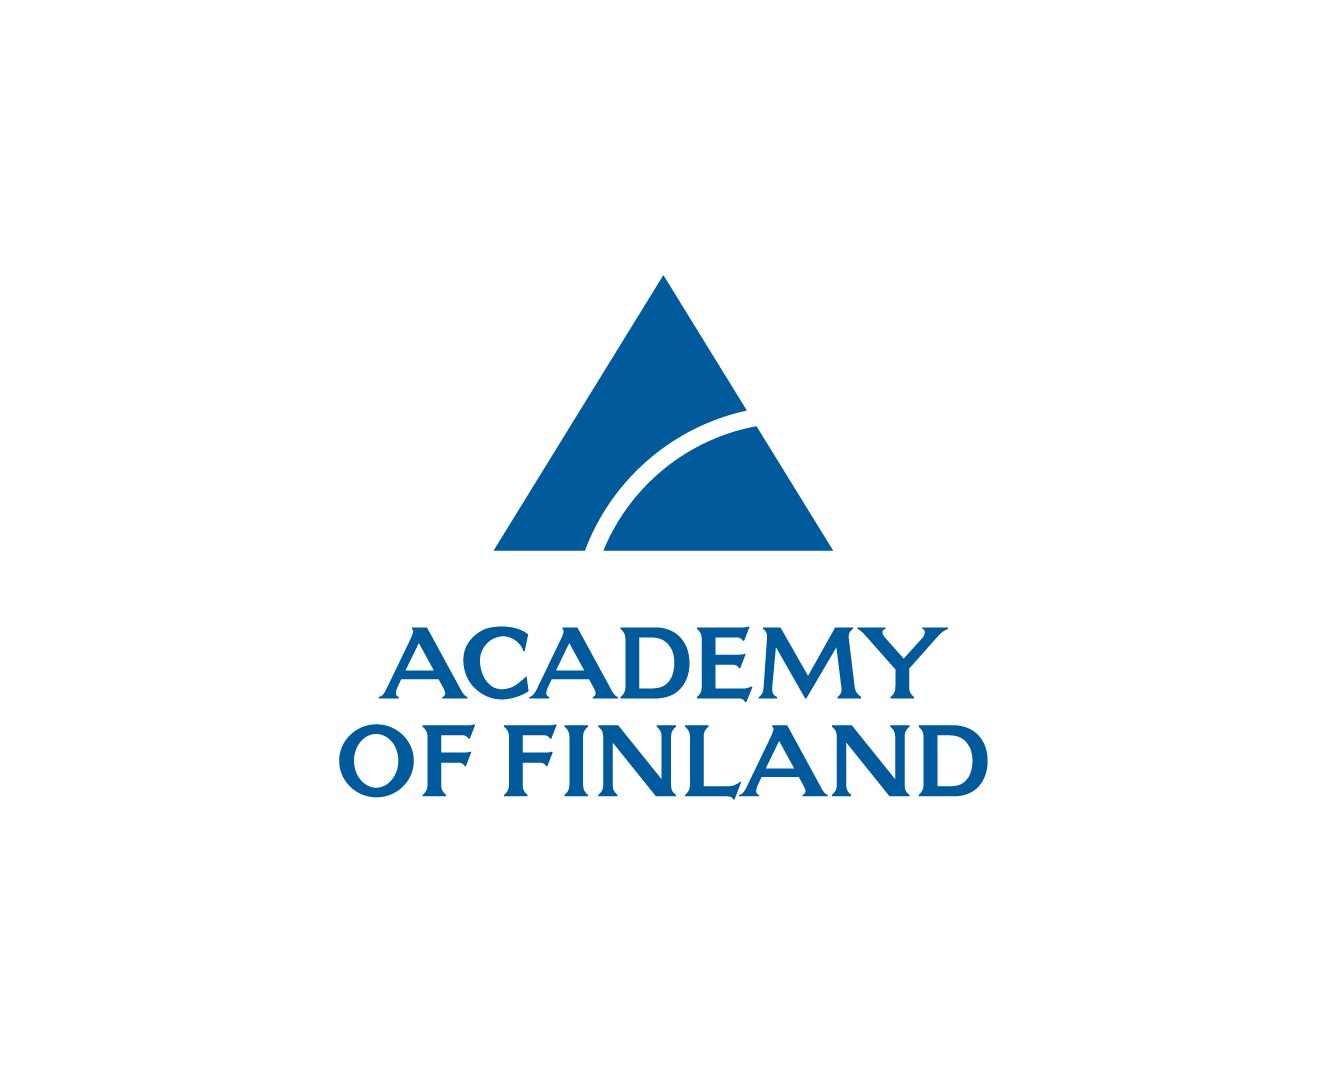 Turku BioImaging holds discussions with the Academy of Finland and the Ministry of Education and Culture